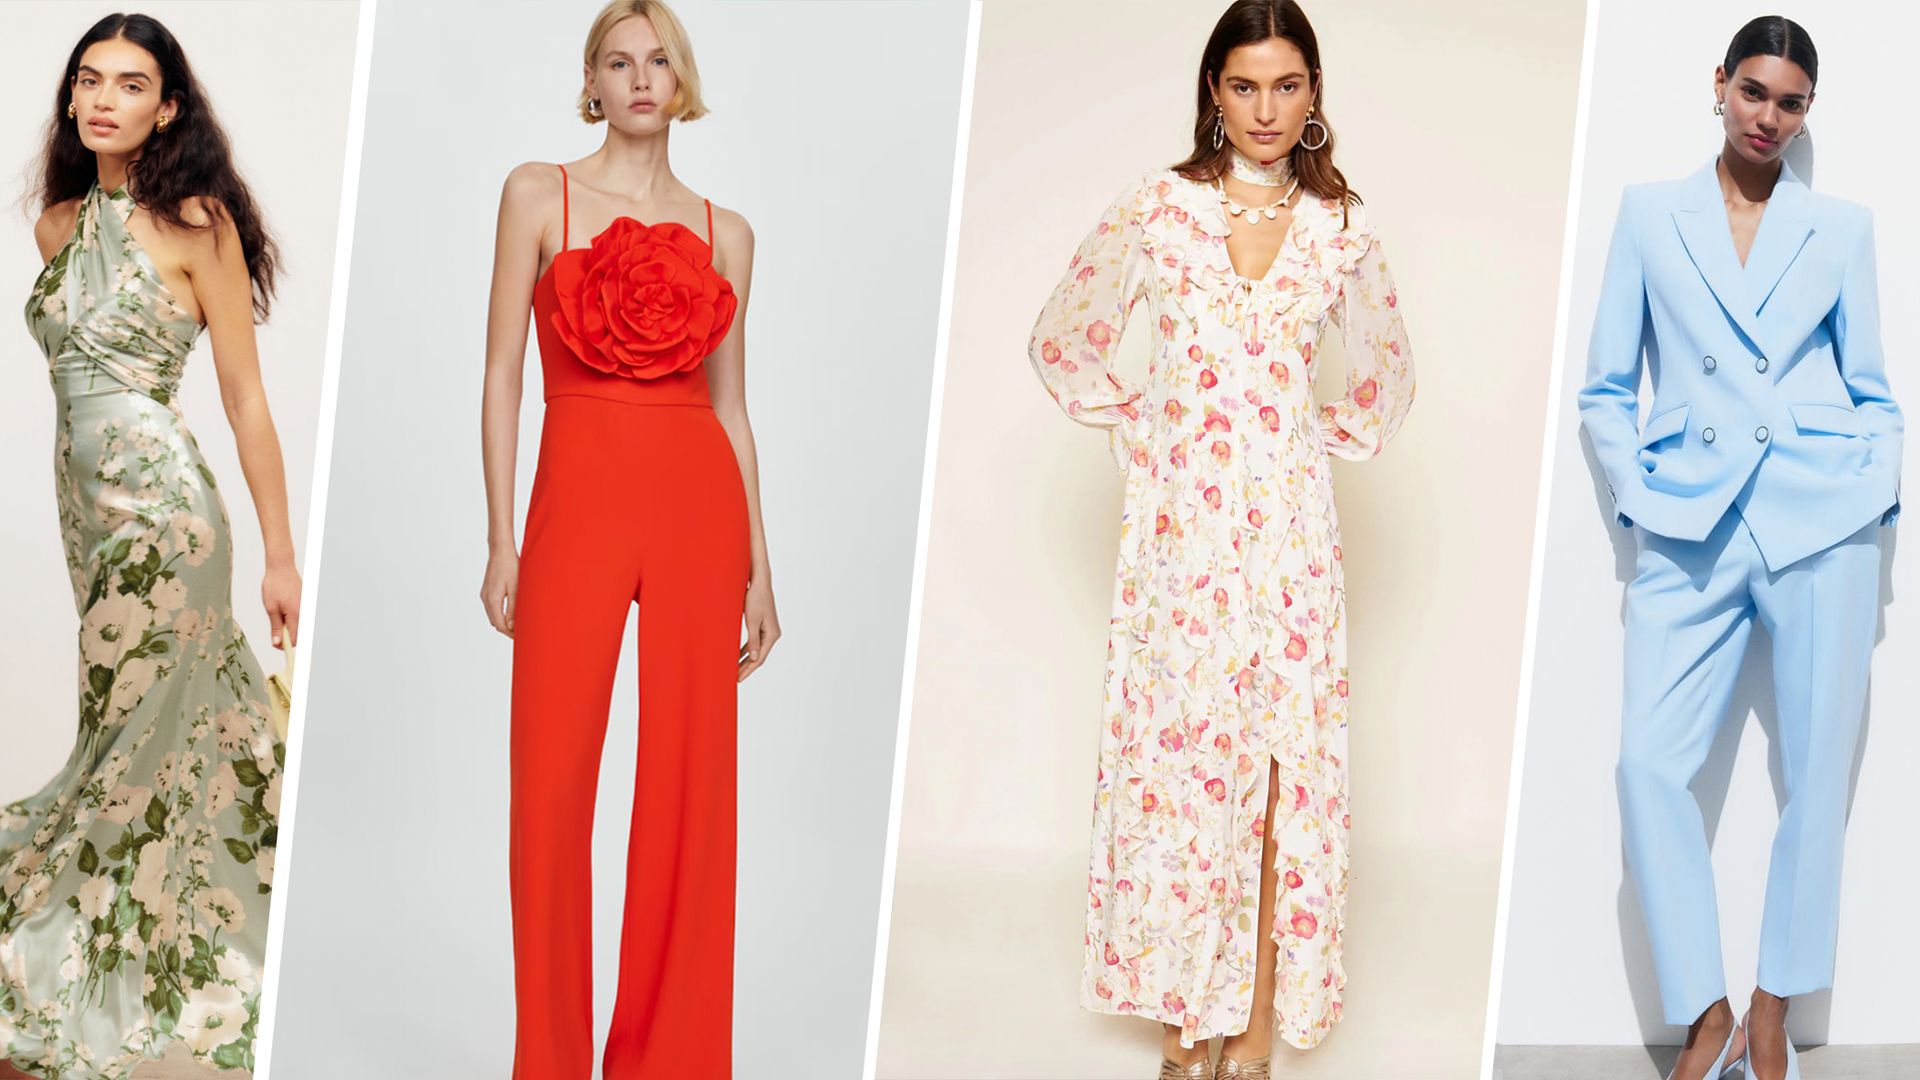 19 wedding guest outfit ideas: From beautiful dresses to chic